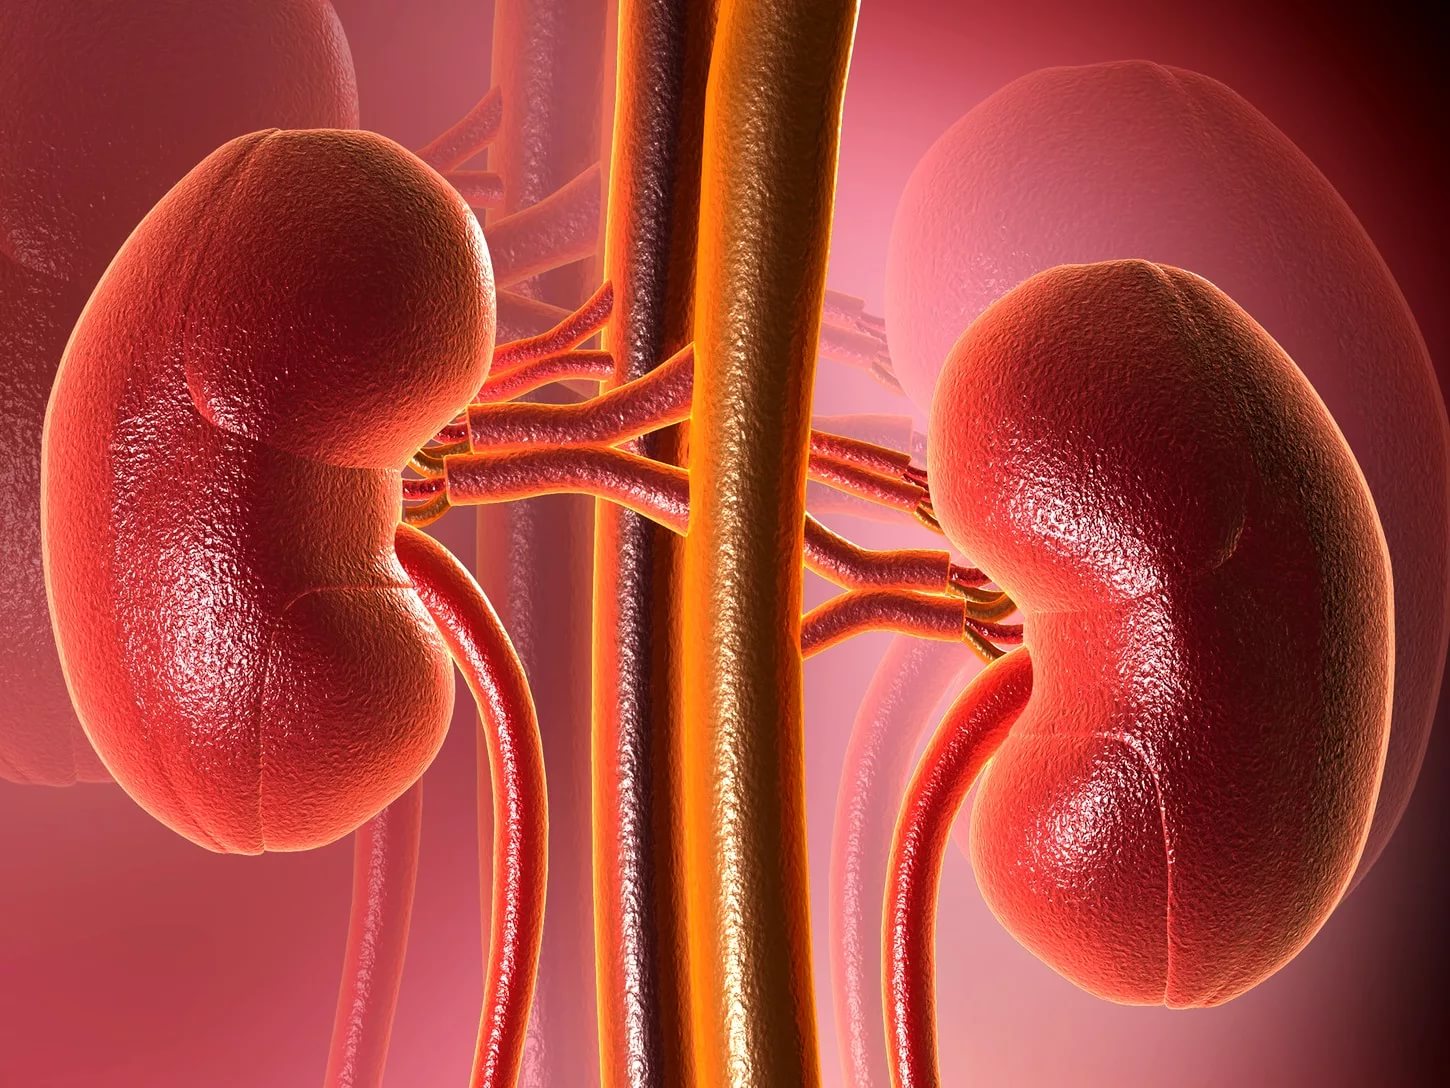 Found a way to slow down the deterioration of kidney function in diabetes